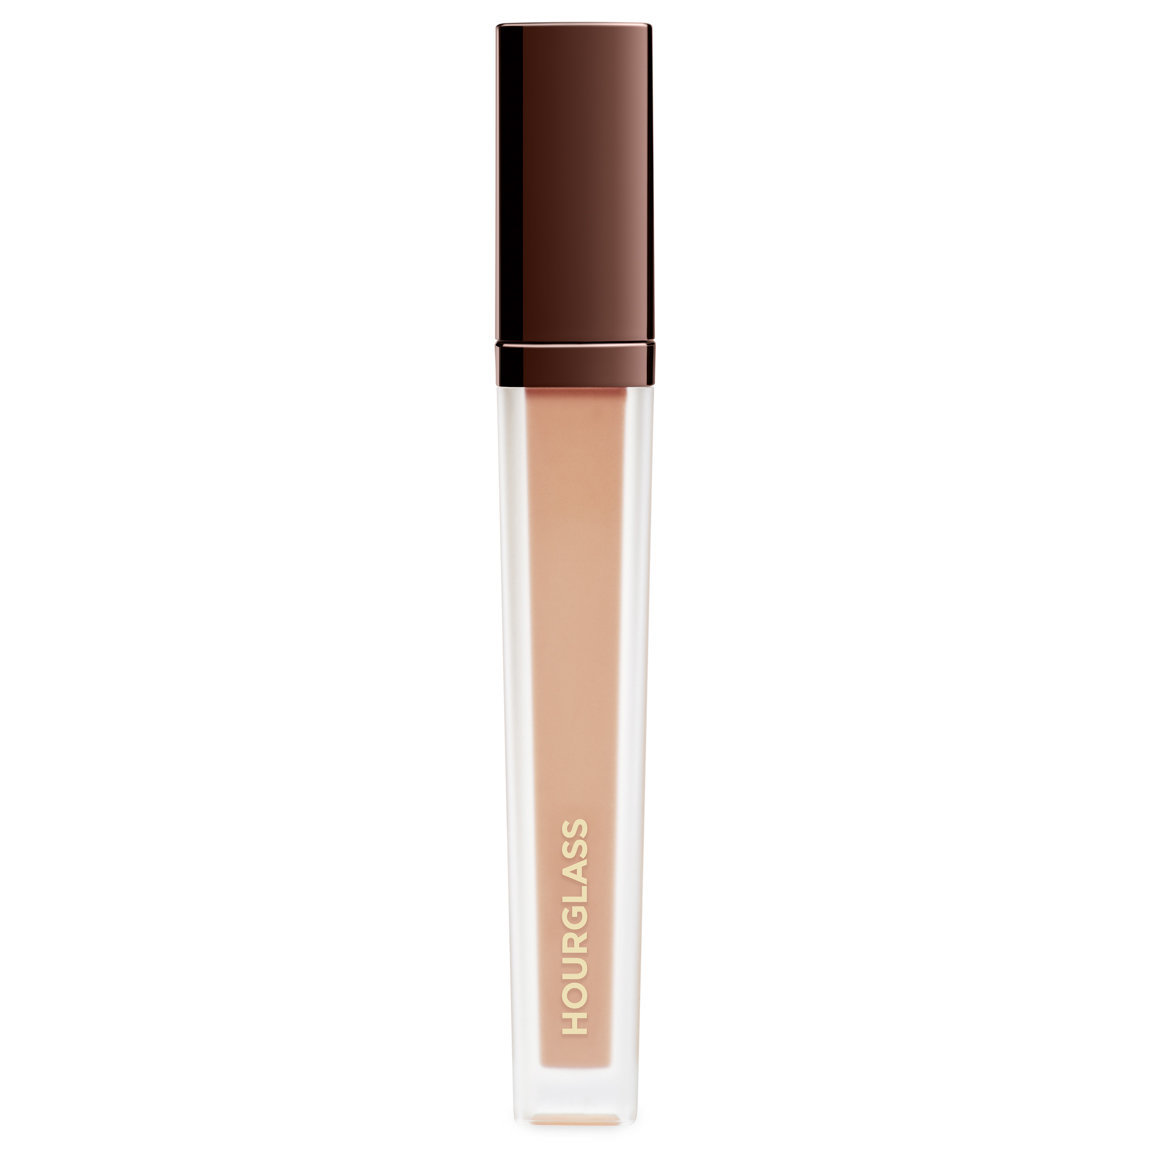 cheaper alternative to hourglass concealer